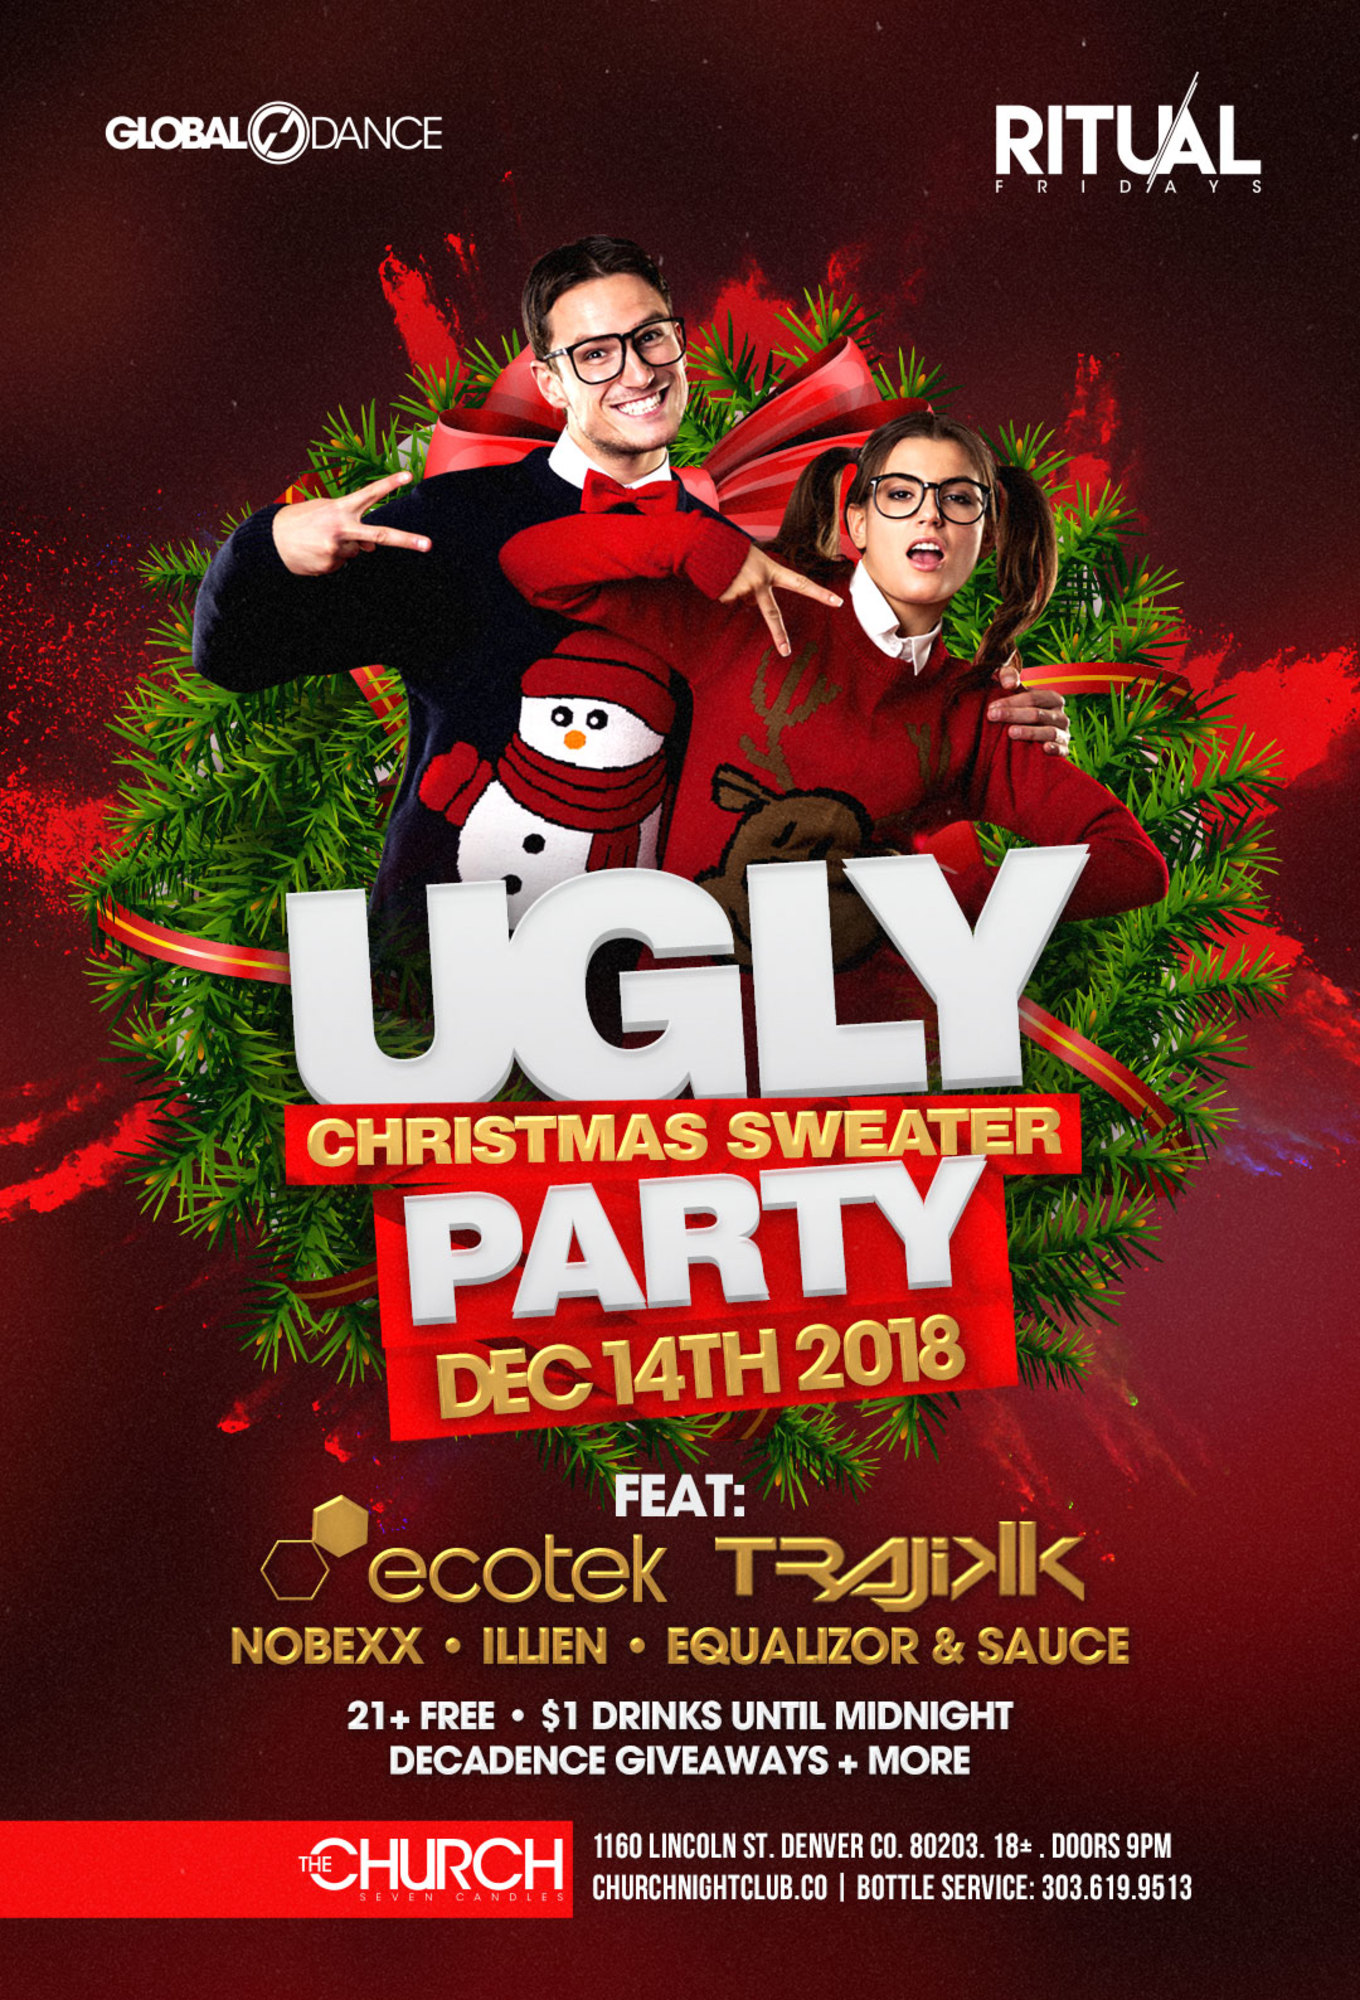 ugly christmas sweater flyer template, ugly christmas sweater contest flyer template free, ugly christmas sweater party flyer template, christmas event flyer template, ugly christmas sweater for men, extremely ugly christmas sweaters